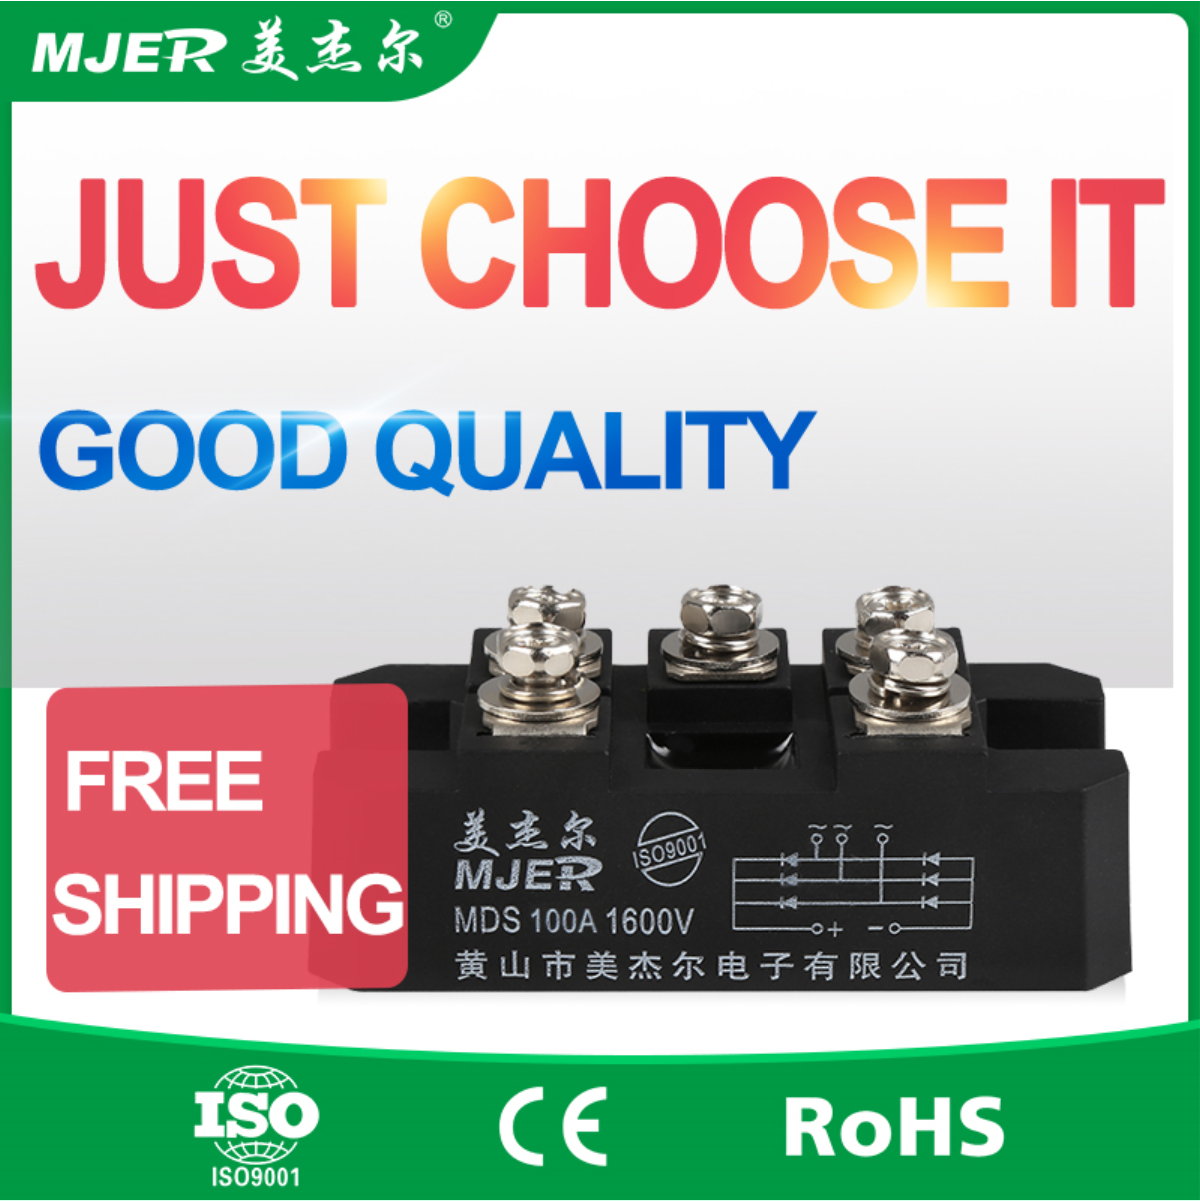 MDS100A Free shipping Three phase Bridge rectifier diode modules MDS 100A 1600V fuji MDS100 rectifier bridge MDS100A1600V